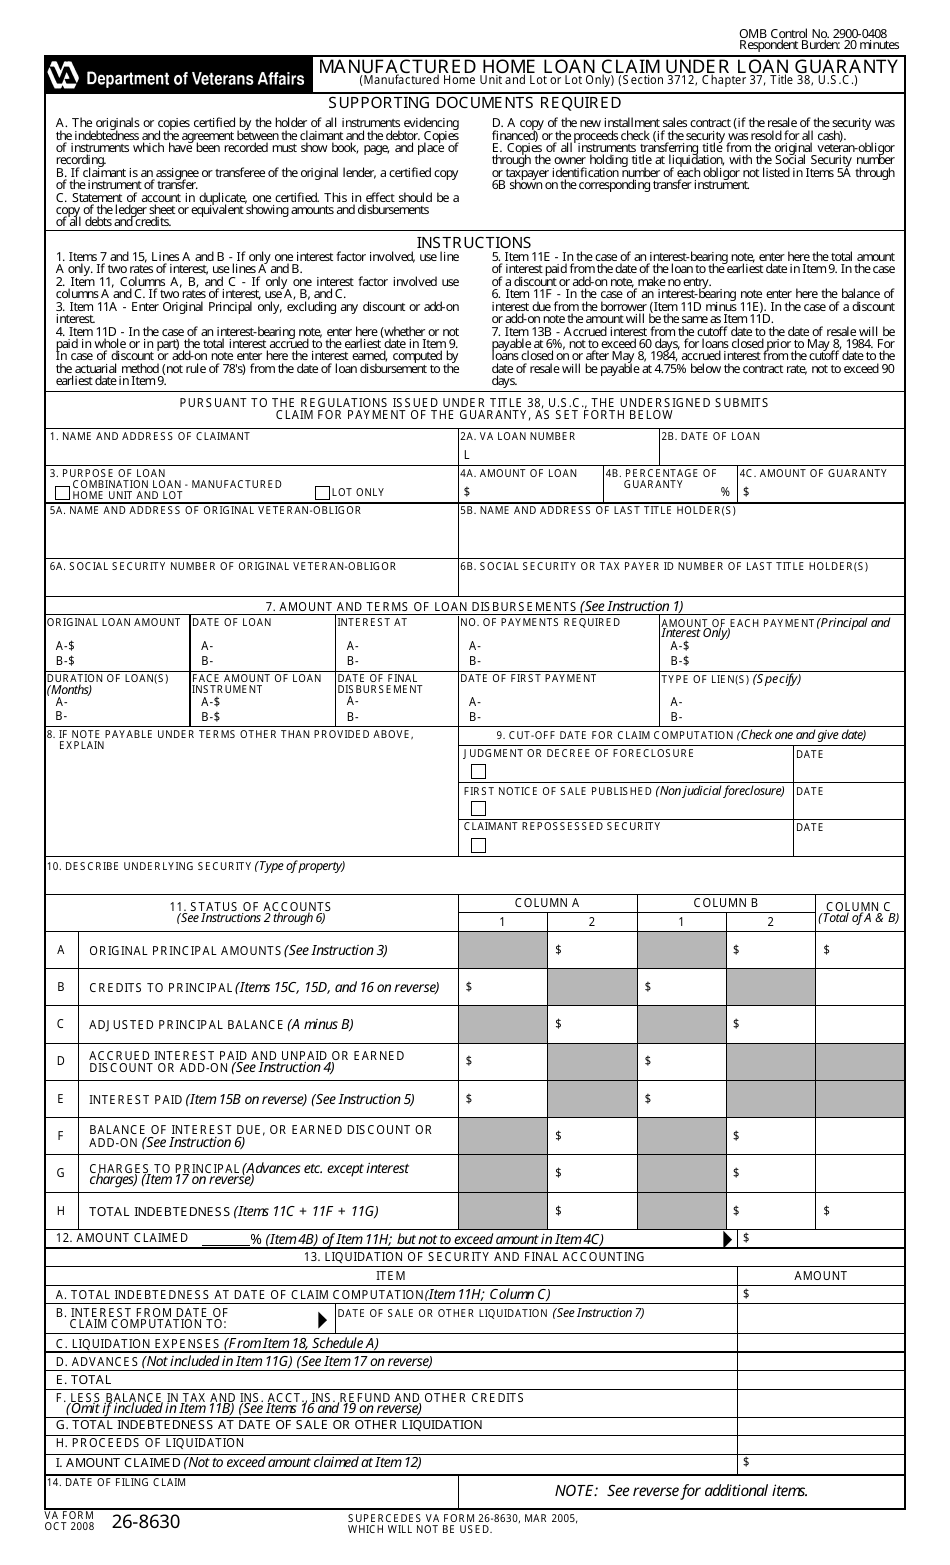 VA Form 26-8630 Manufactured Home Loan Claim Under Loan Guaranty, Page 1